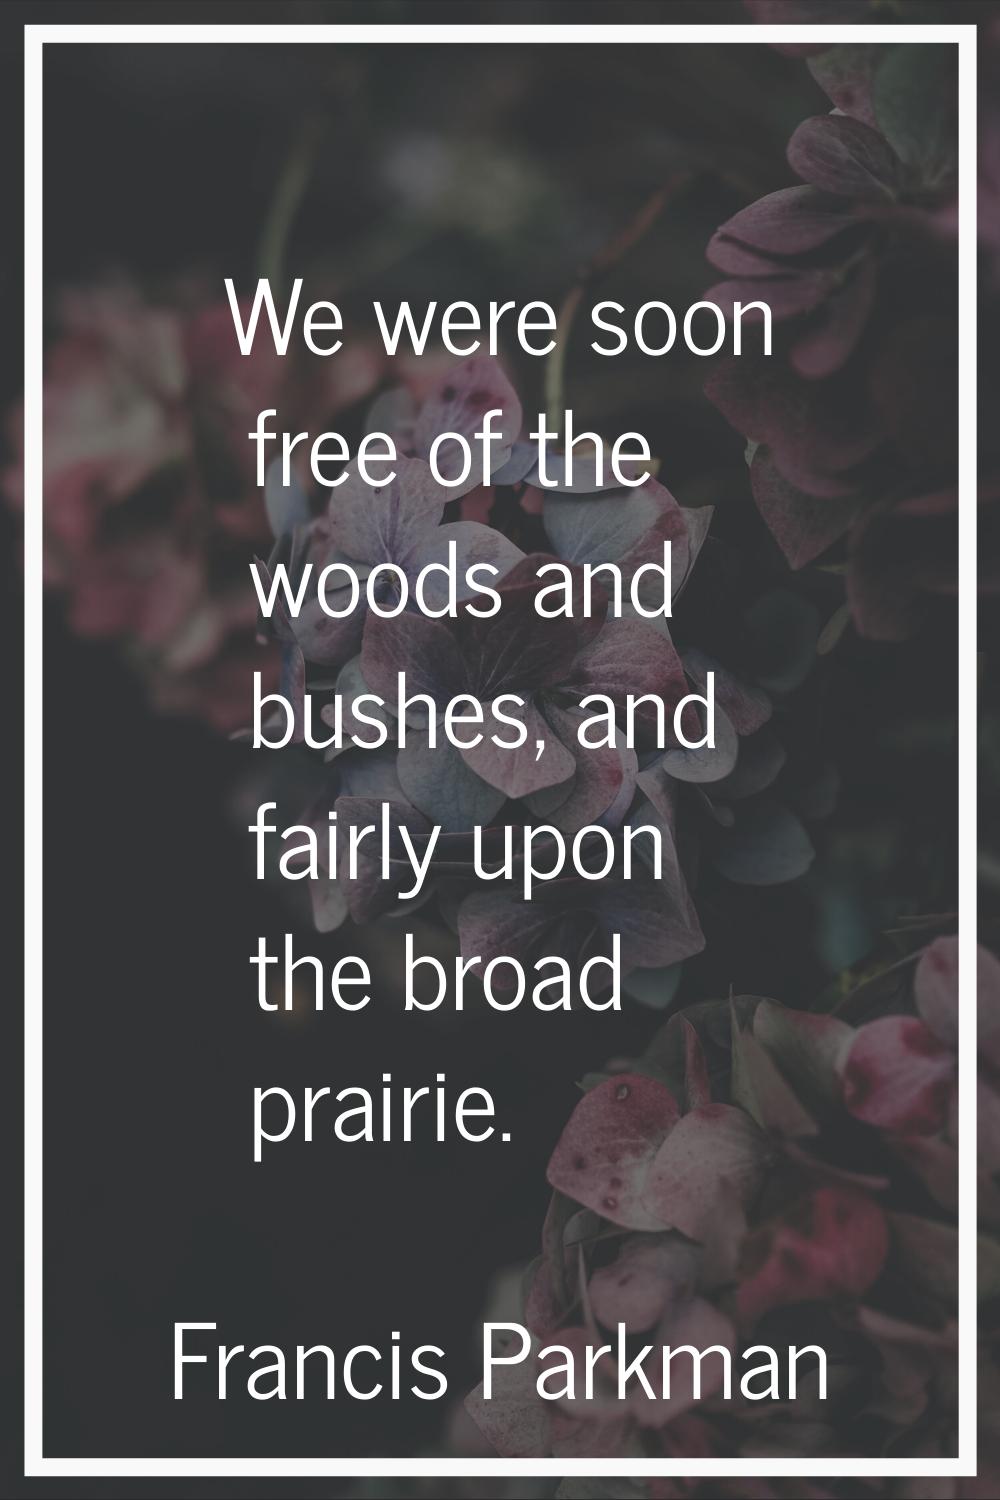 We were soon free of the woods and bushes, and fairly upon the broad prairie.